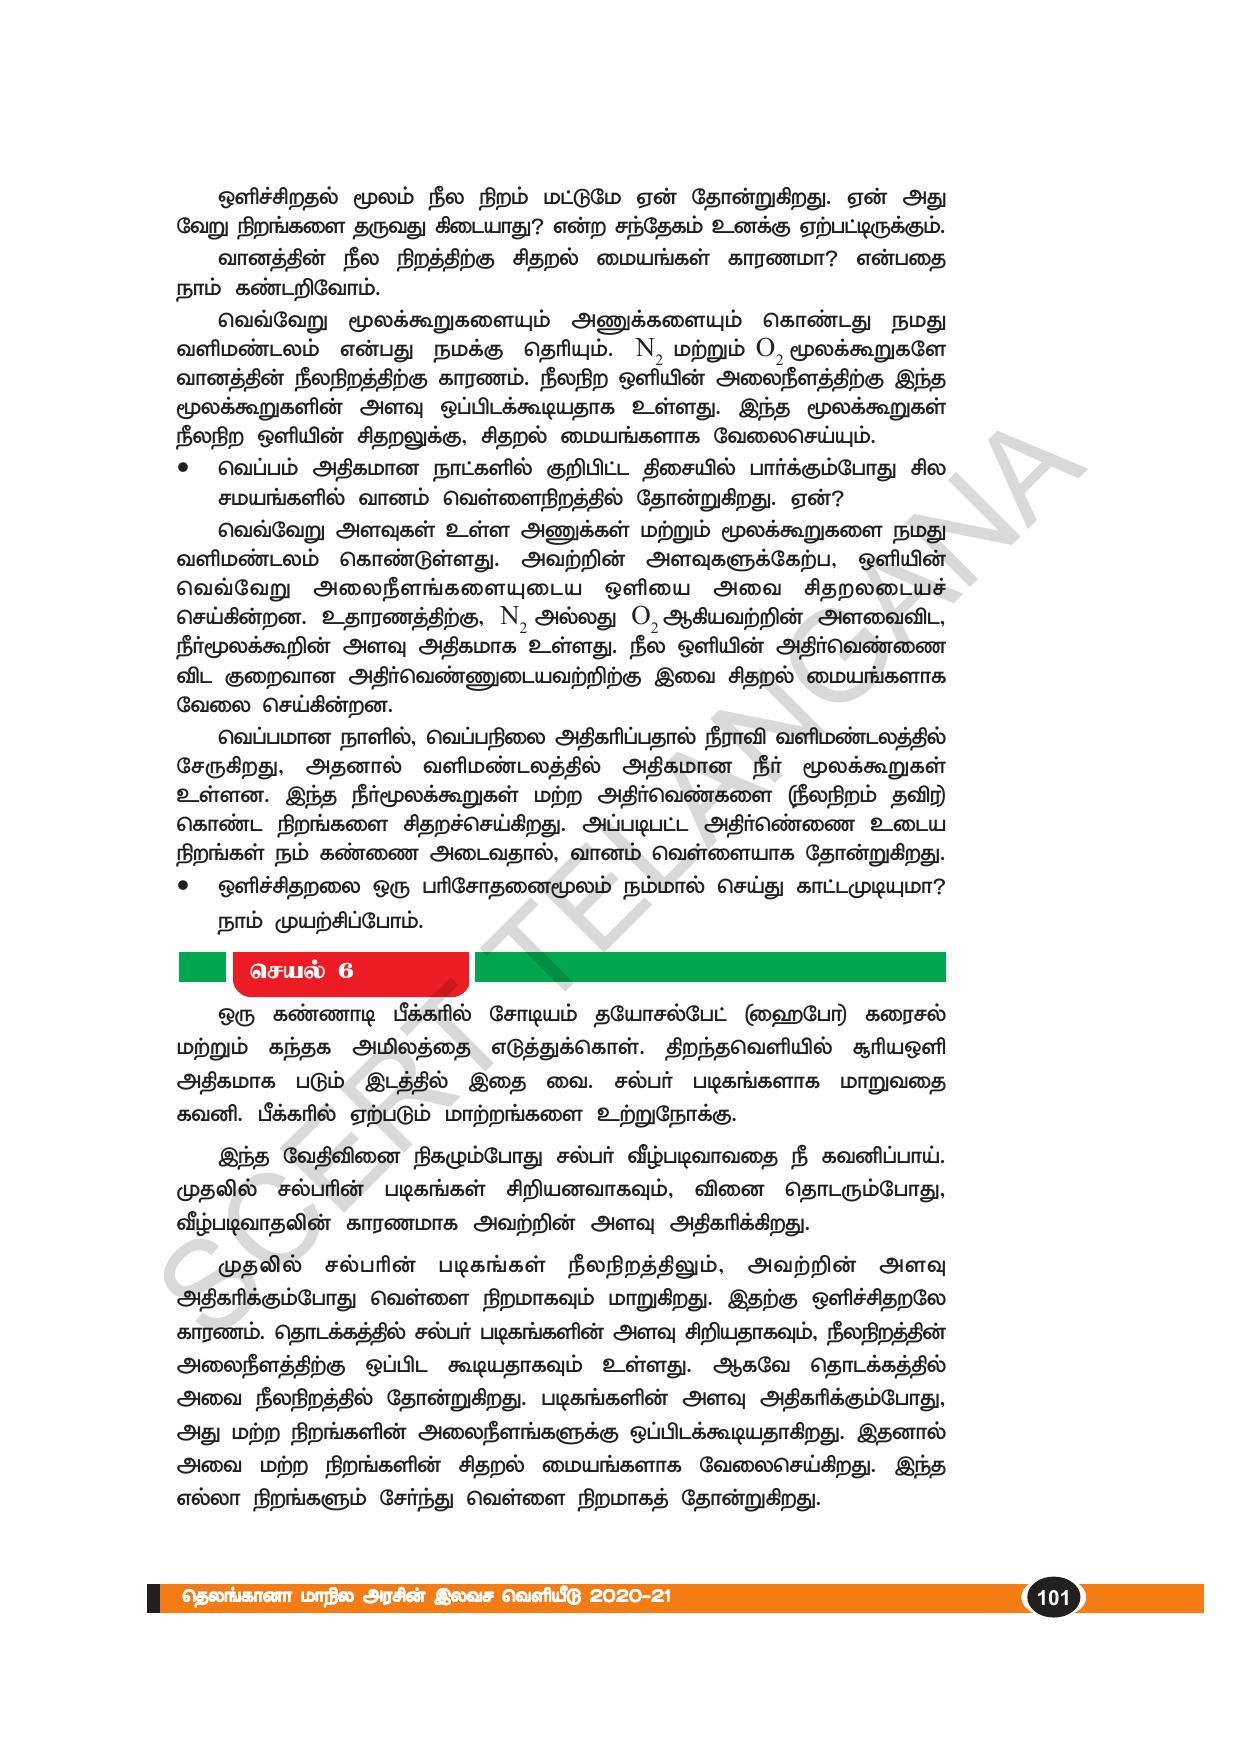 TS SCERT Class 10 Physical Science(Tamil Medium) Text Book - Page 113